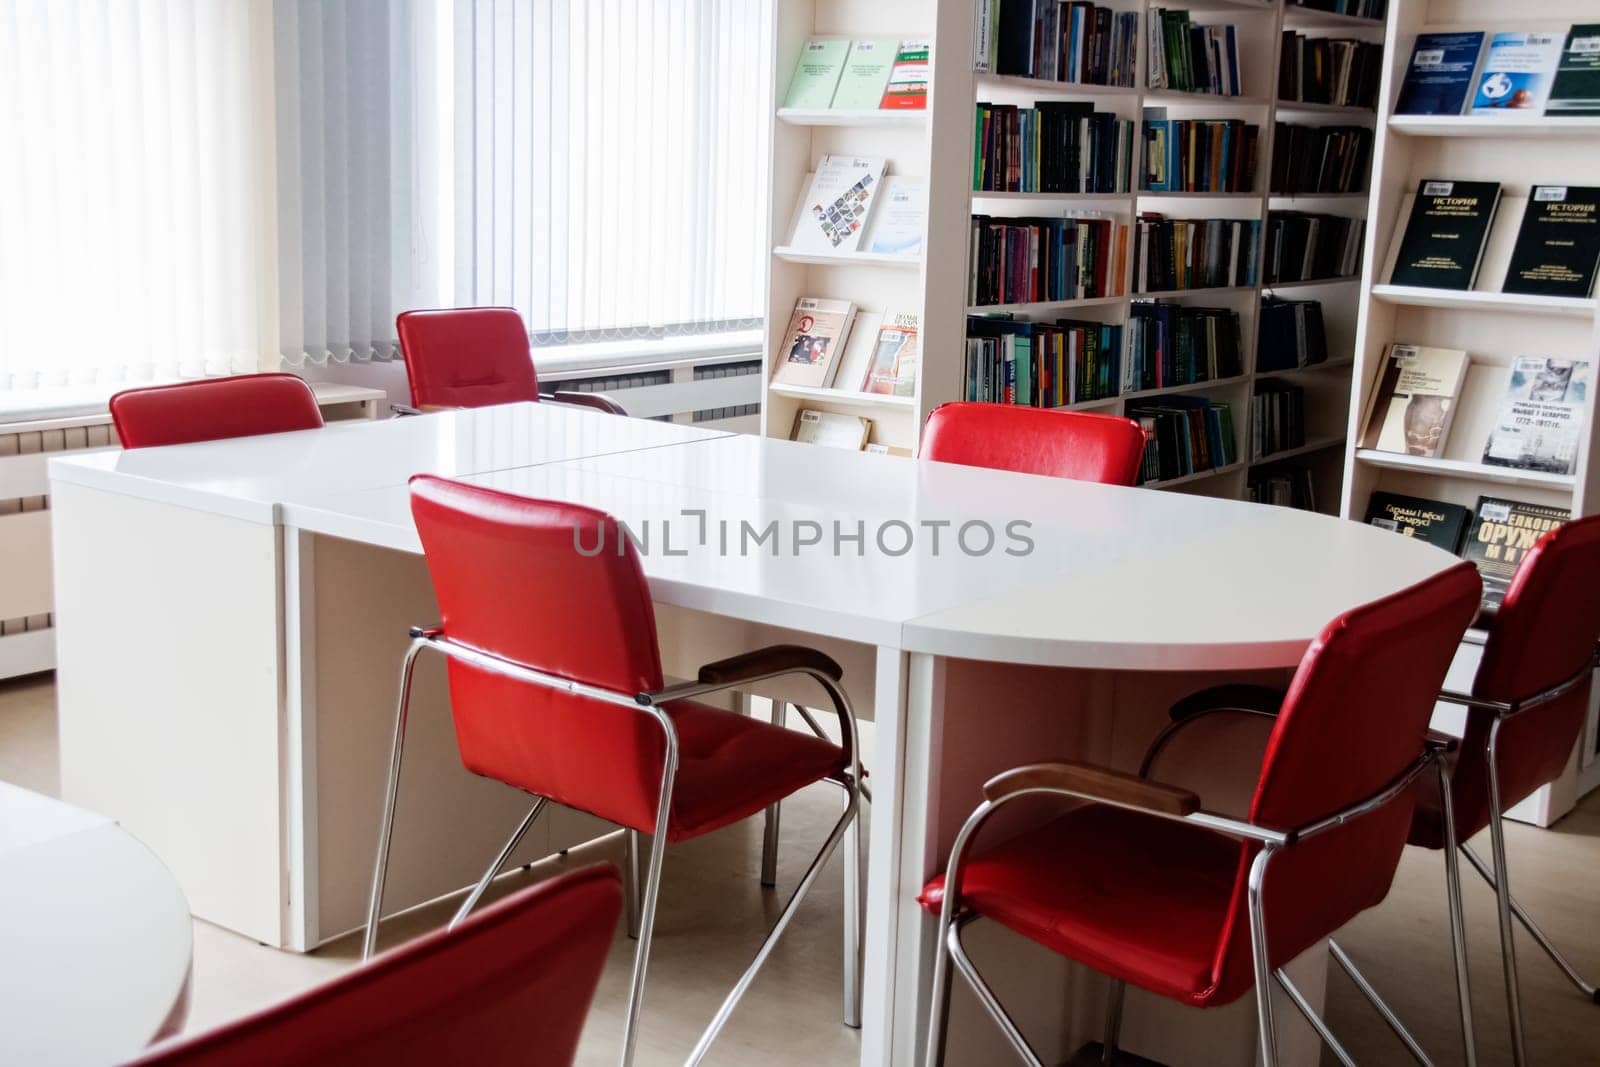 Belarus, Minsk - 18 september, 2019: A table in the library by Vera1703